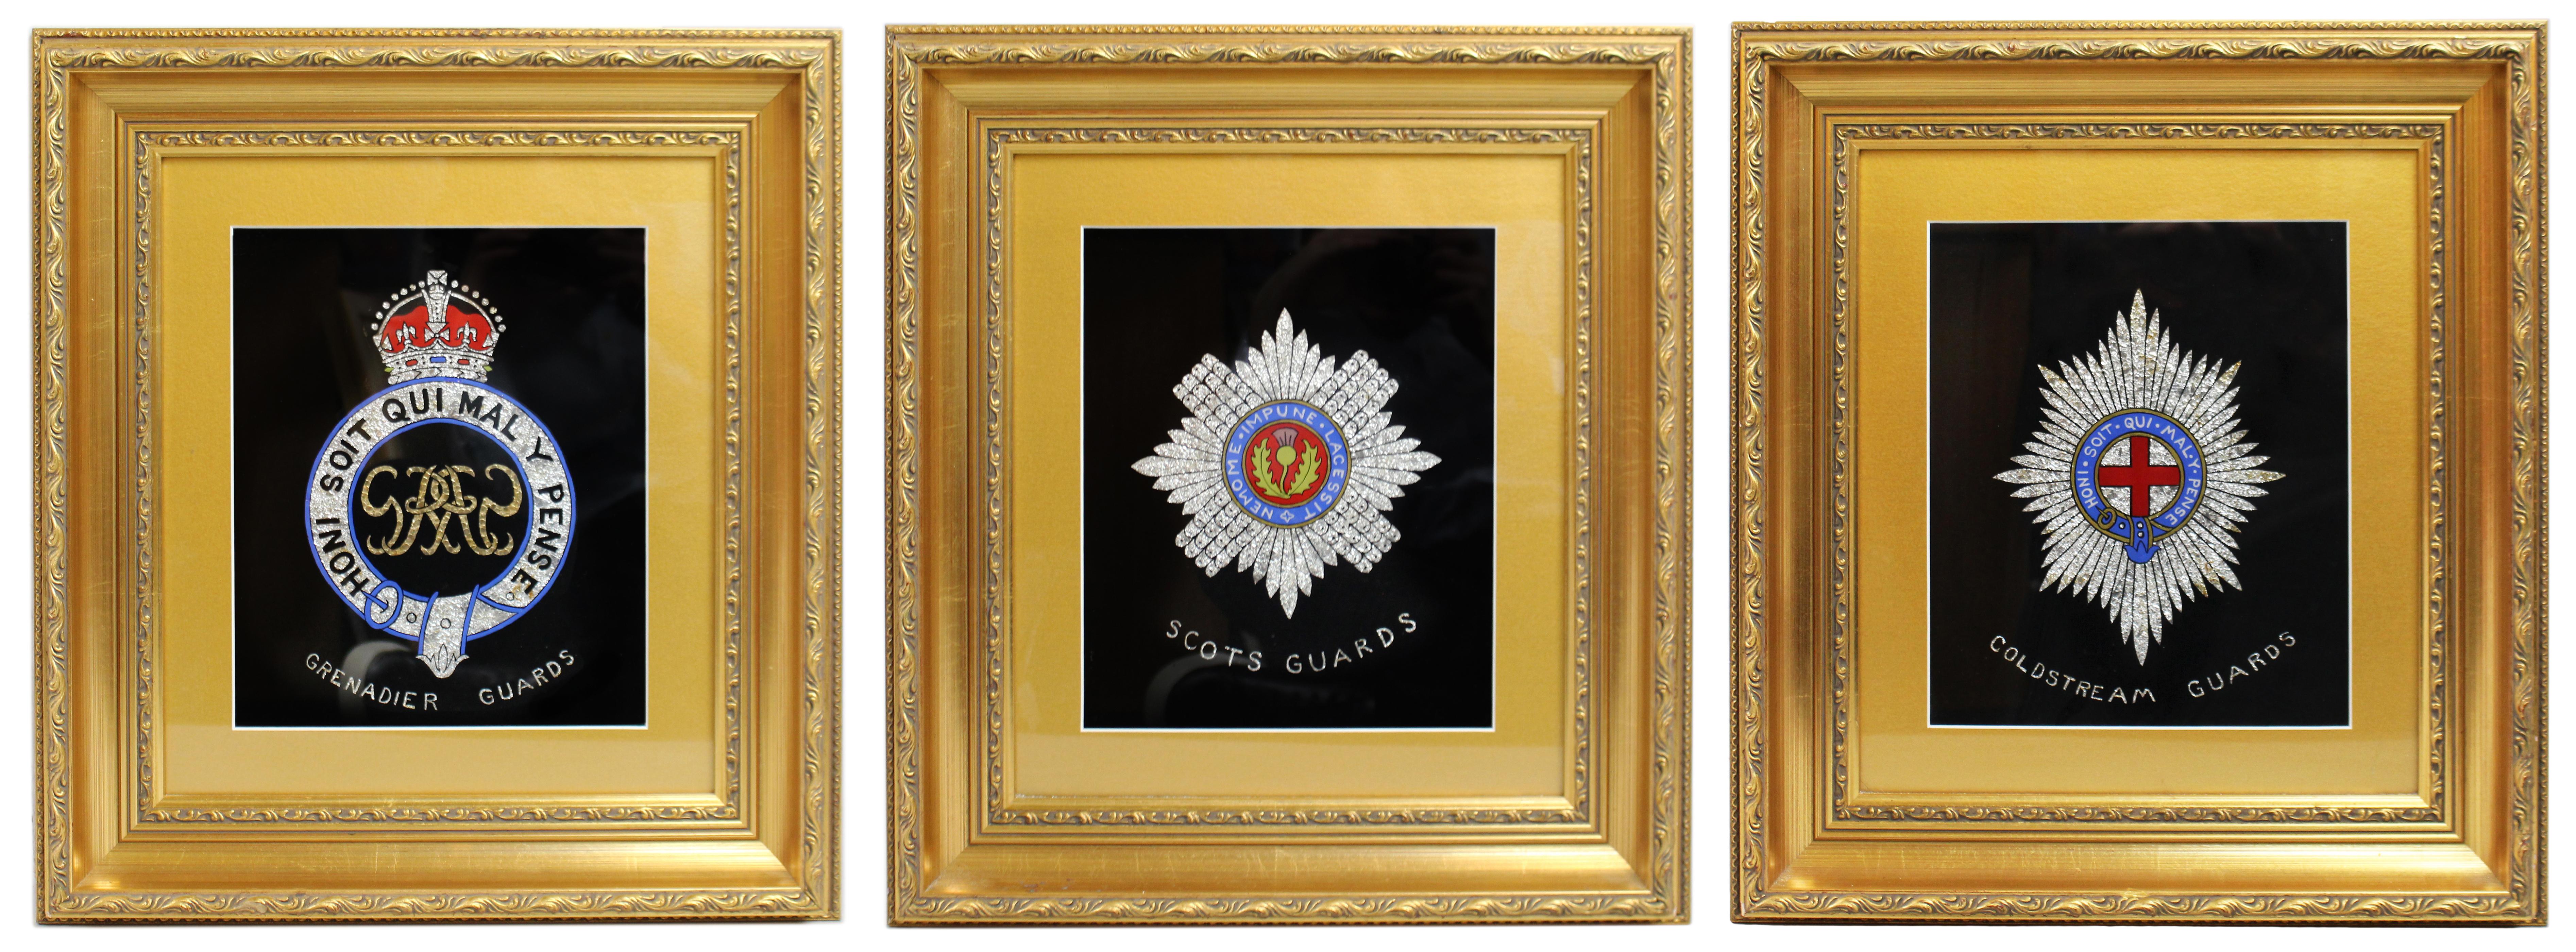 Set of 3 Military Regiment foil artworks set in gilt frames


We are pleased to offer a set of 3 foil artworks of the British regiments the Grenadier Guards, Scots Guards & Coldstream Guards
 
Hand made creations dating from the mid twentieth